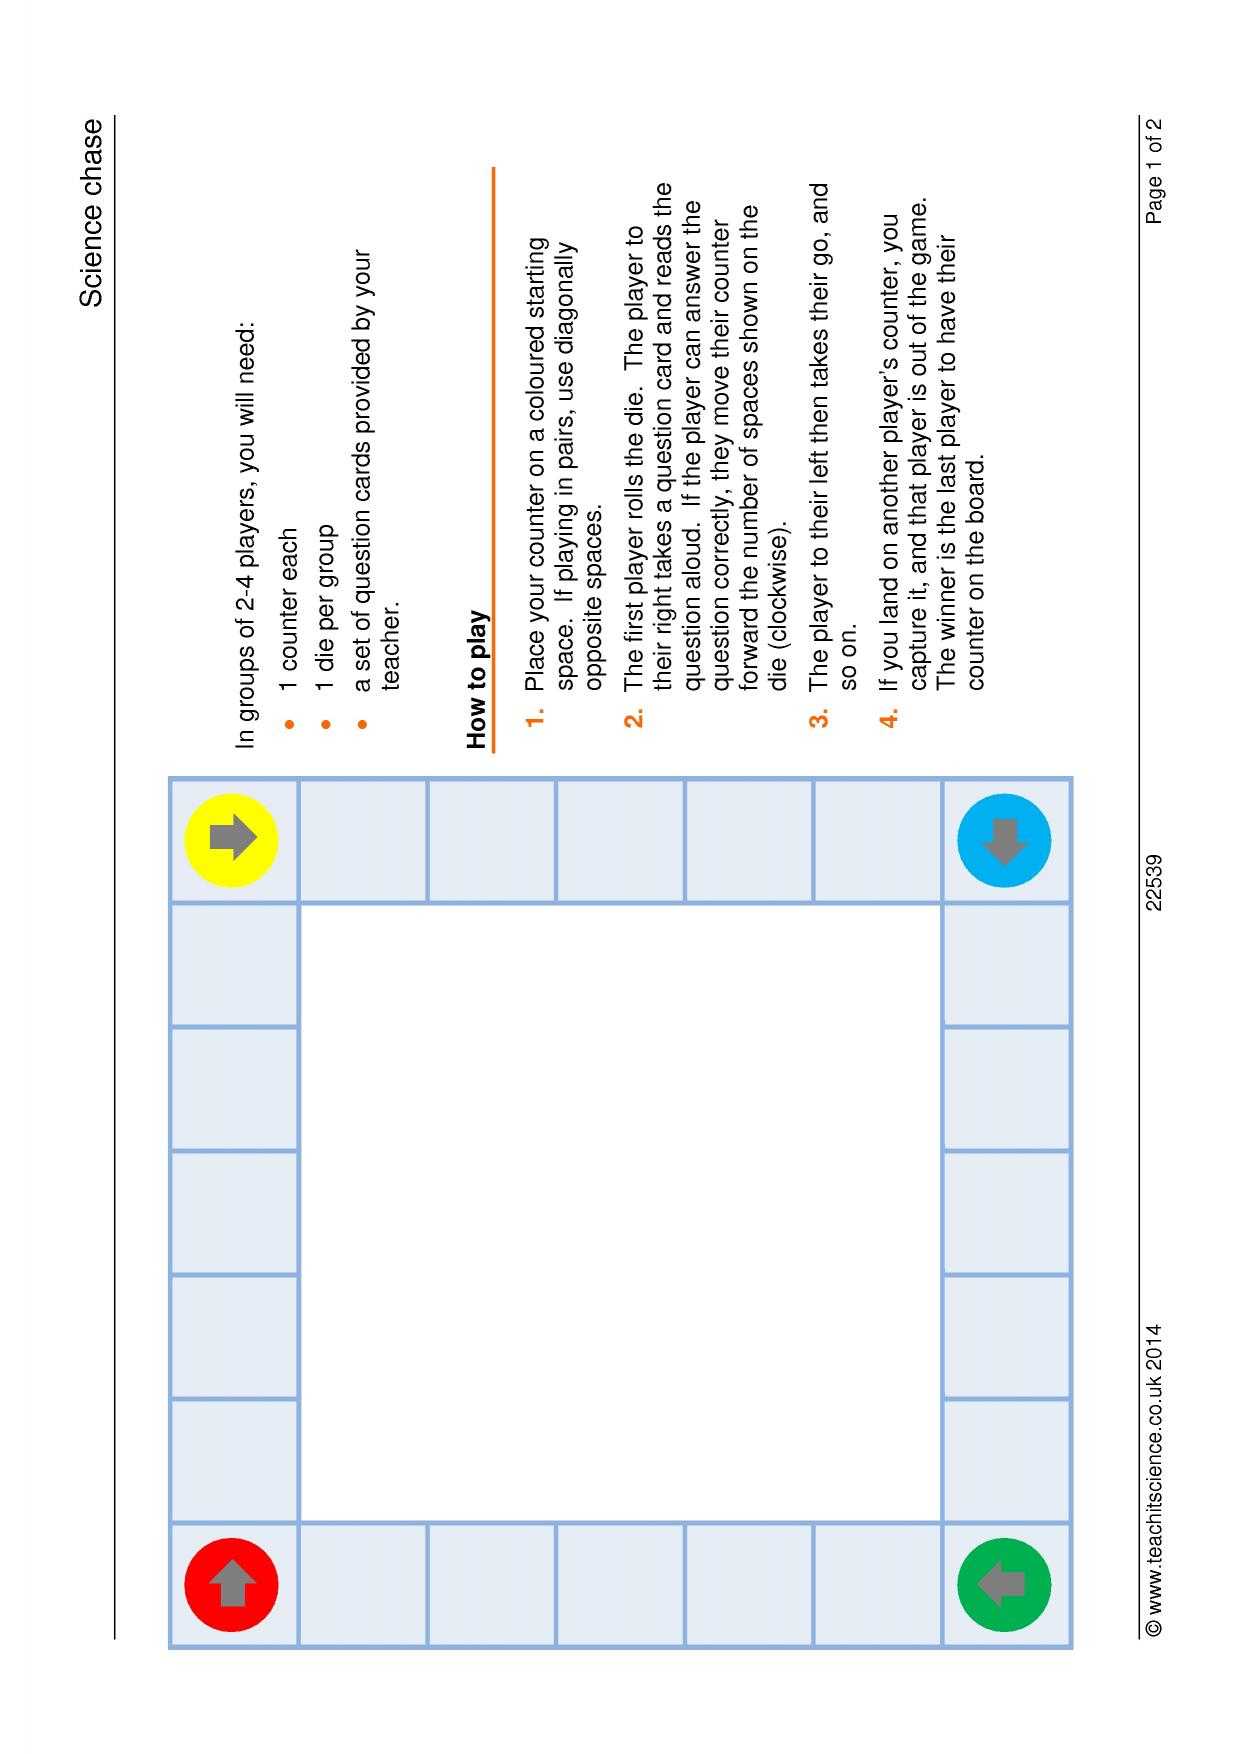 Gcse Revision Timetable Template Back To School Tips Your 3 With Blank Revision Timetable Template